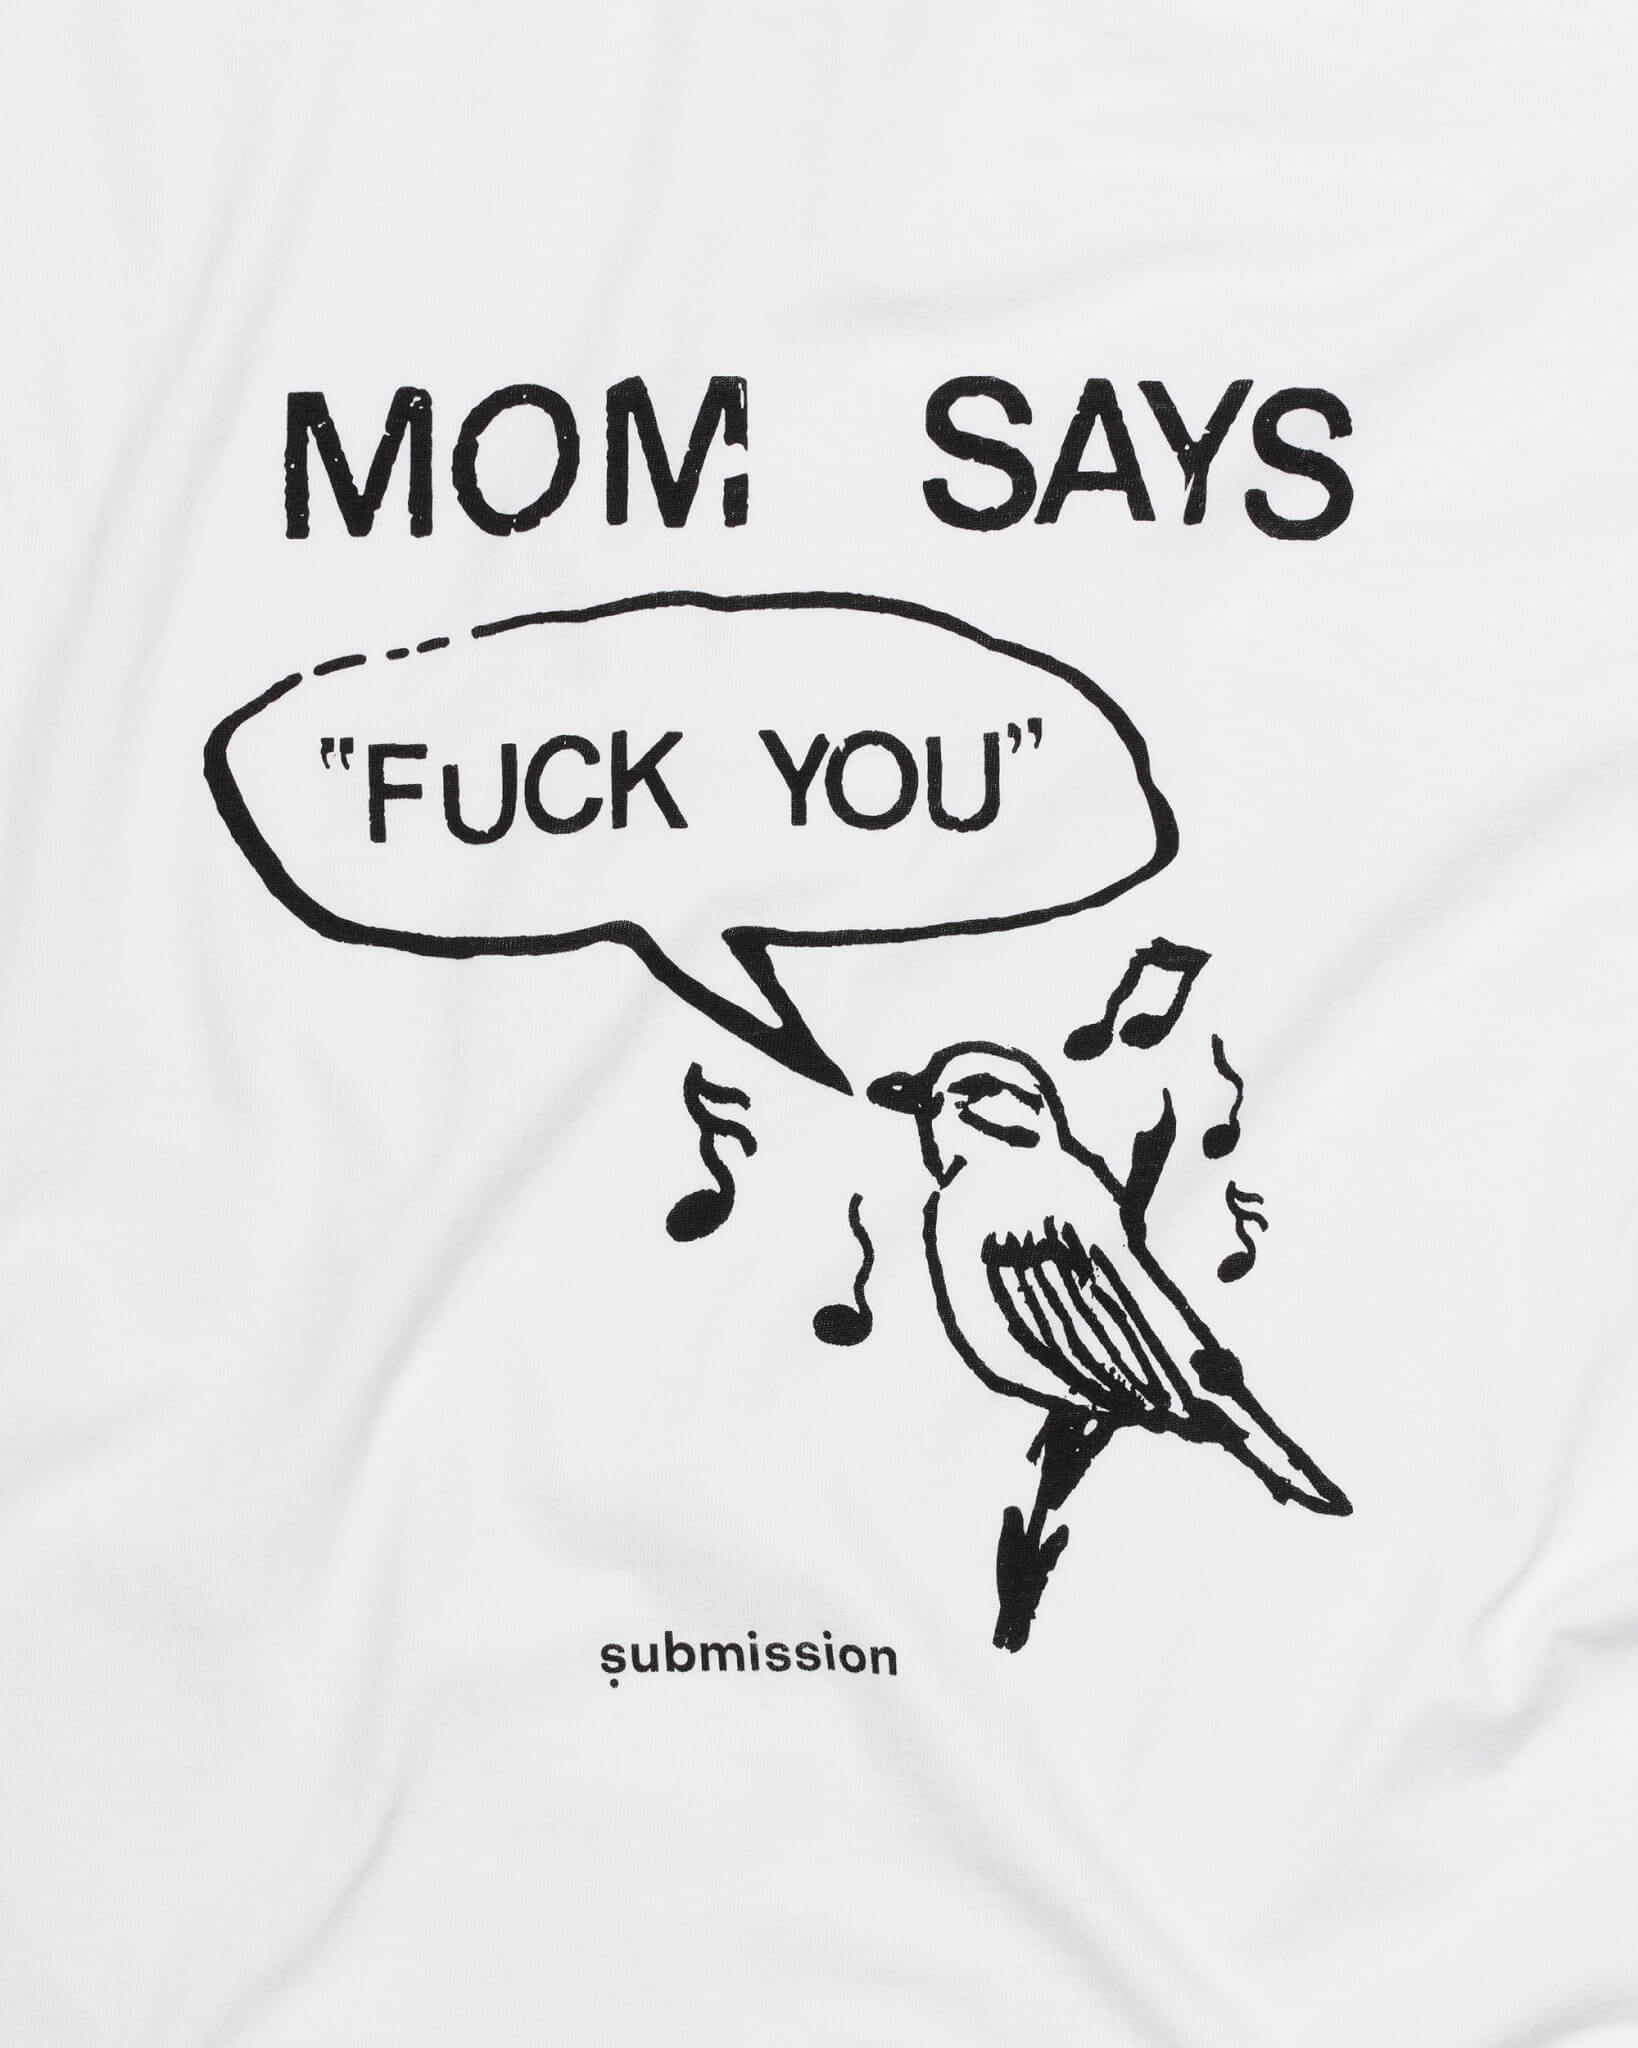 A detail shot of a T-shirt graphic with a black-and-white graphic depicting a cartoon bird surrounded by musical notes with a speech bubble in which the words “FUCK YOU” appear in capital letters in quotation marks, above which the words “MOM SAYS” appear in capital letters, and a logo beneath the entire graphic with the word “submission” in bold, lowercase type